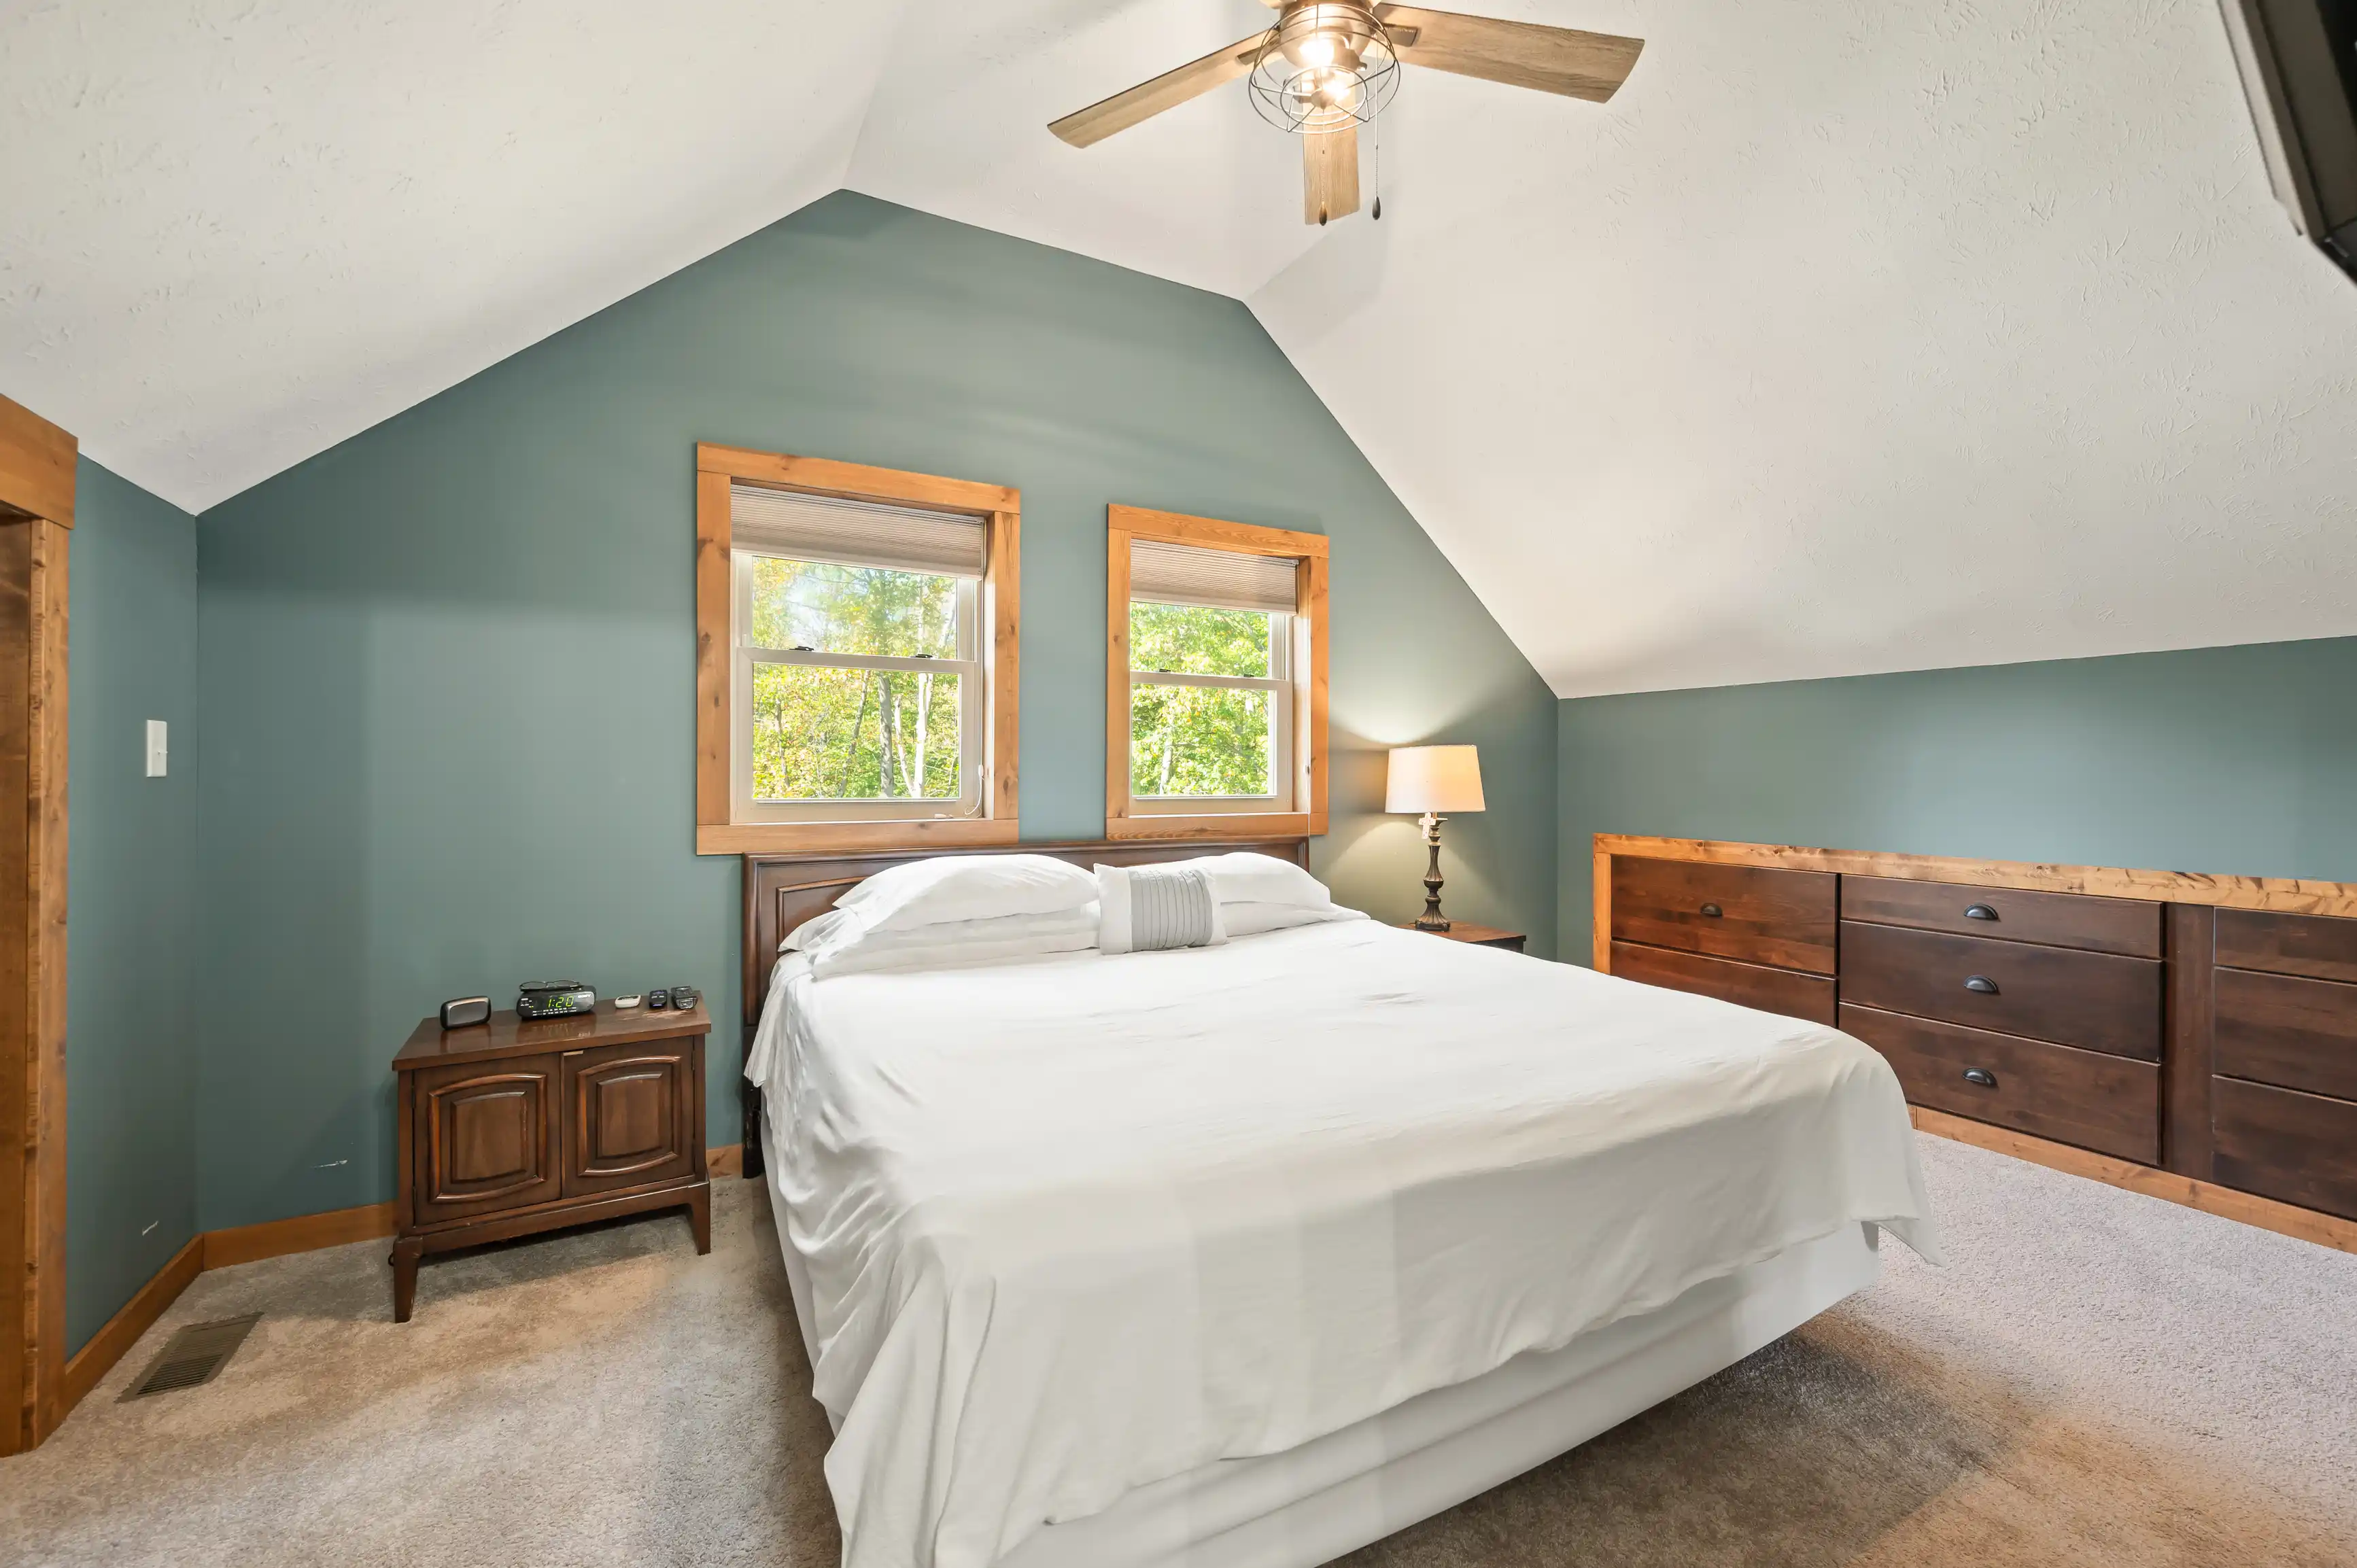 Cozy bedroom with slanted ceiling, teal accent wall, large bed with white bedding, wooden furniture, and a ceiling fan. Two windows show greenery outside.